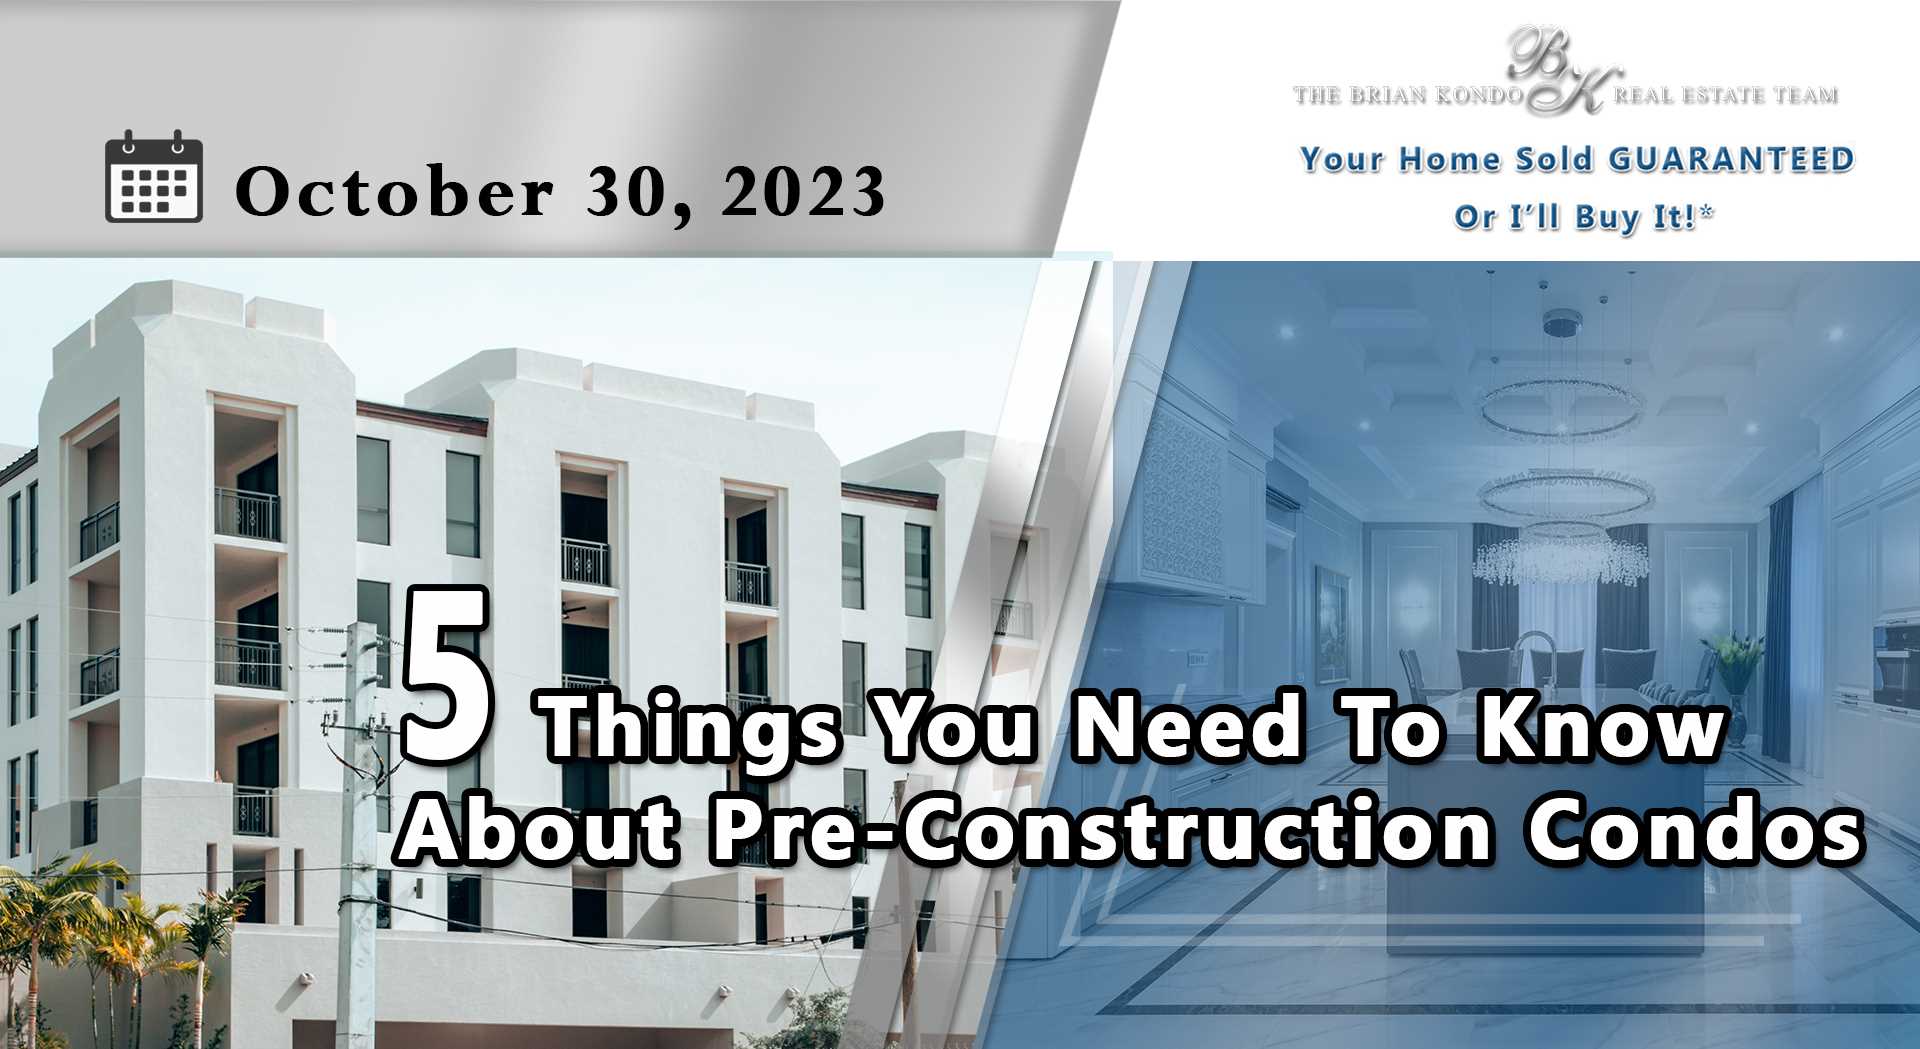 5 Things You Need To Know About Pre-Construction Condos